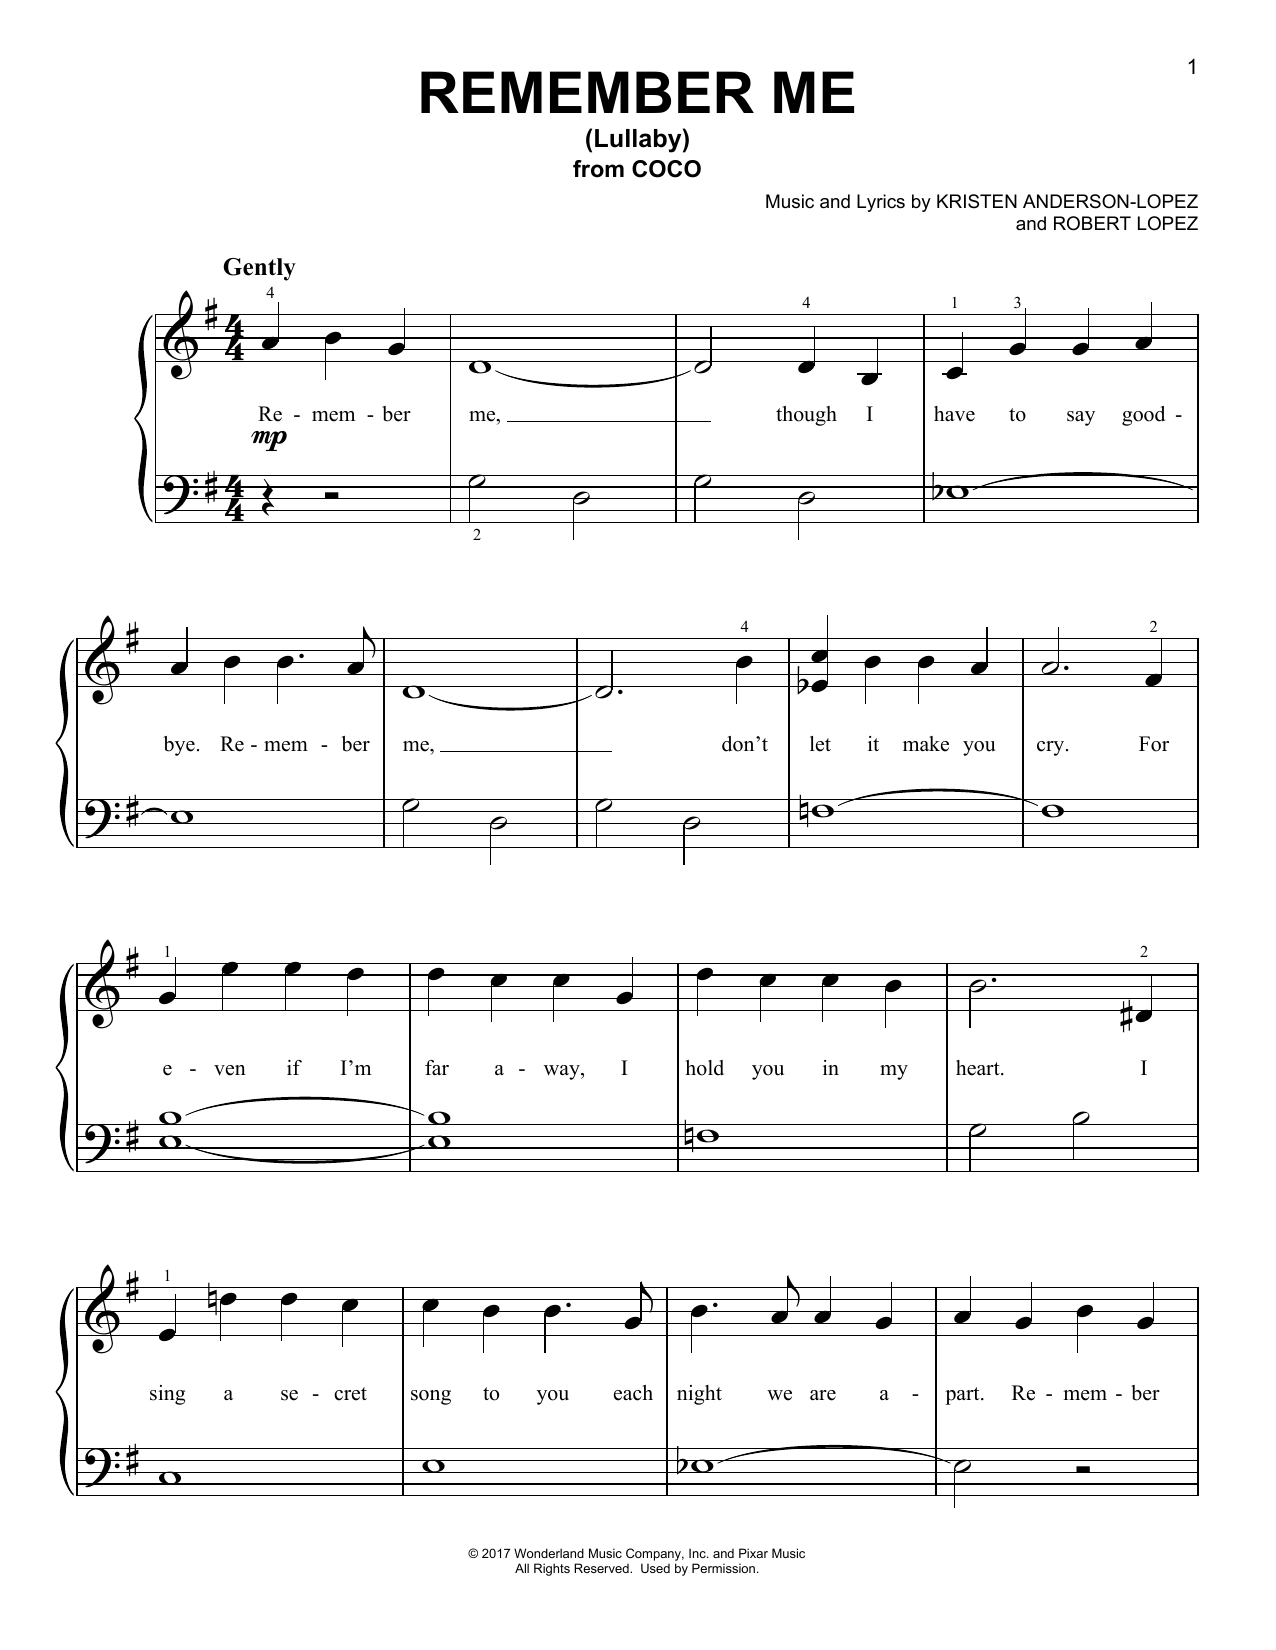 Download Kristen Anderson-Lopez & Robert Lope Remember Me (Lullaby) (from Coco) Sheet Music